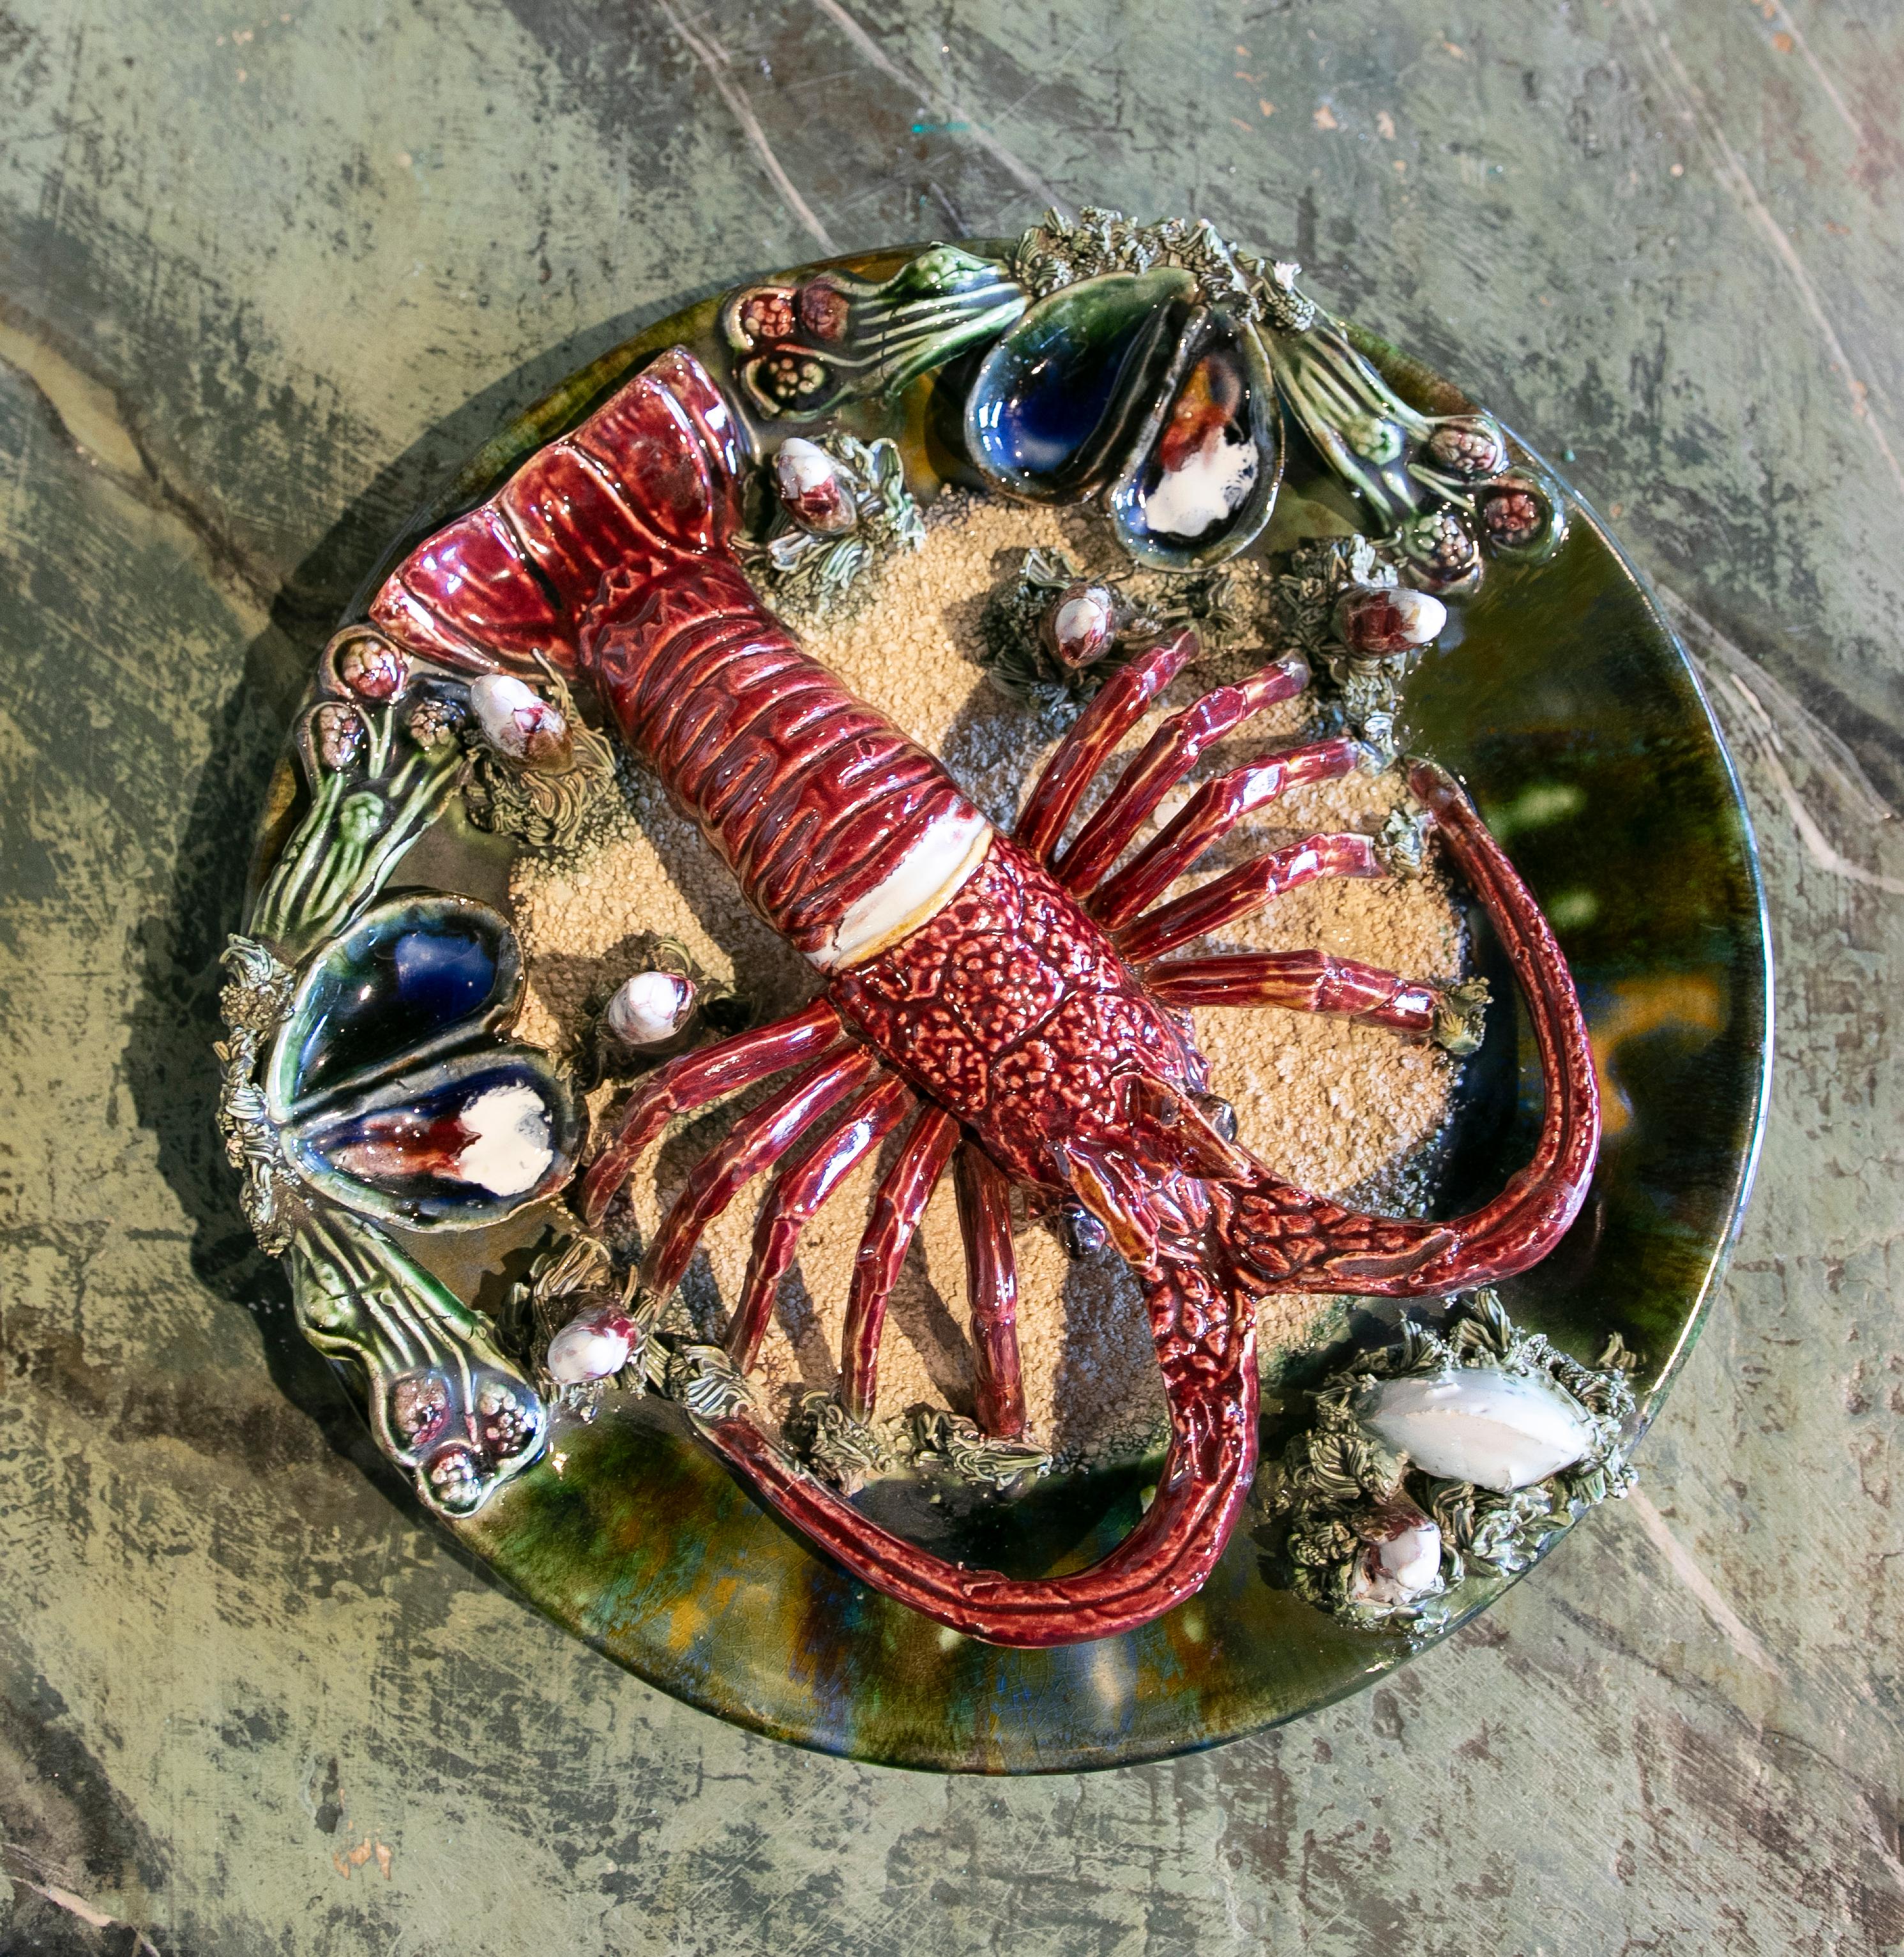 20th Century Portuguese Decorative Ceramic Plate with Lobster